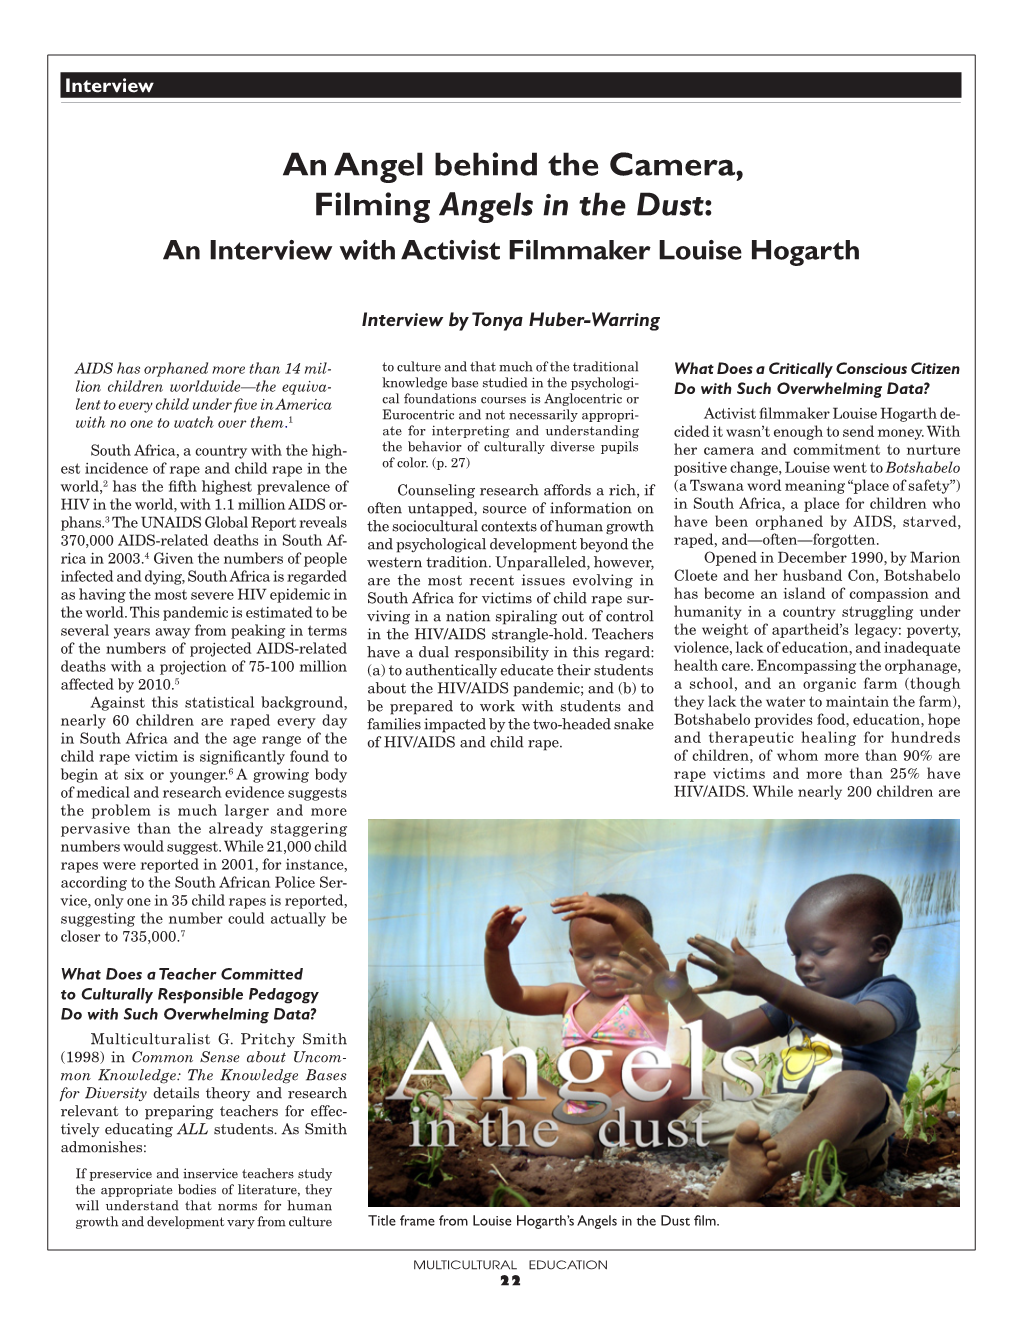 An Angel Behind the Camera, Filming Angels in the Dust: an Interview with Activist Filmmaker Louise Hogarth